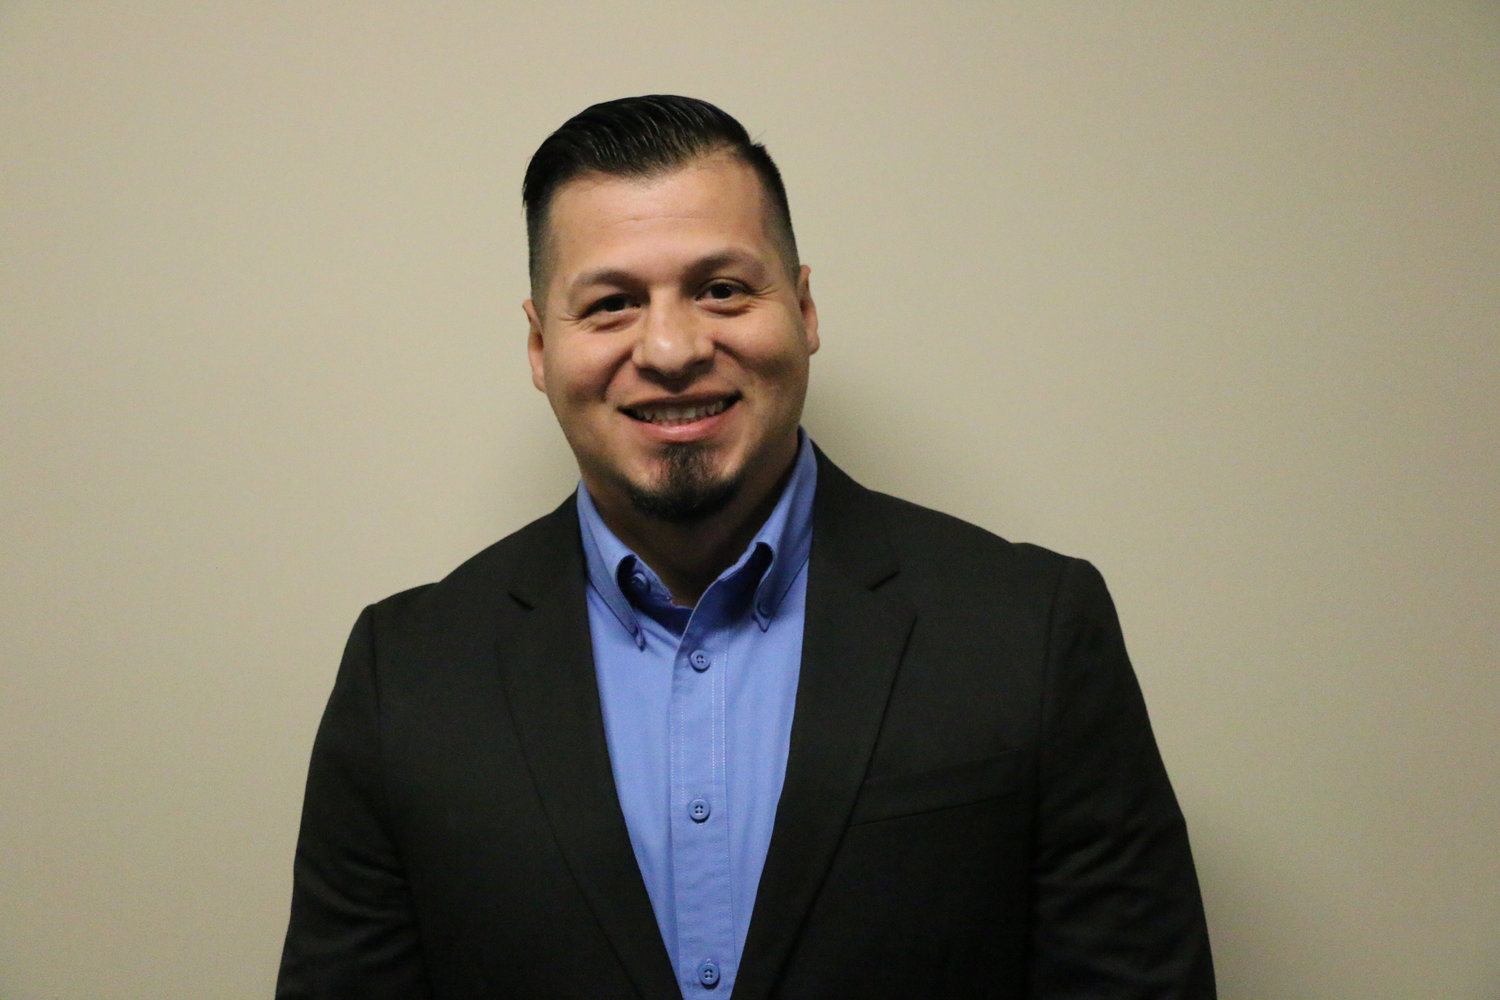 Trustees with Royal ISD have accepted the resignation of Joseph Campos from the Position 1 Trustee seat. Campos tendered his resignation after moving outside of the district's physical borders.